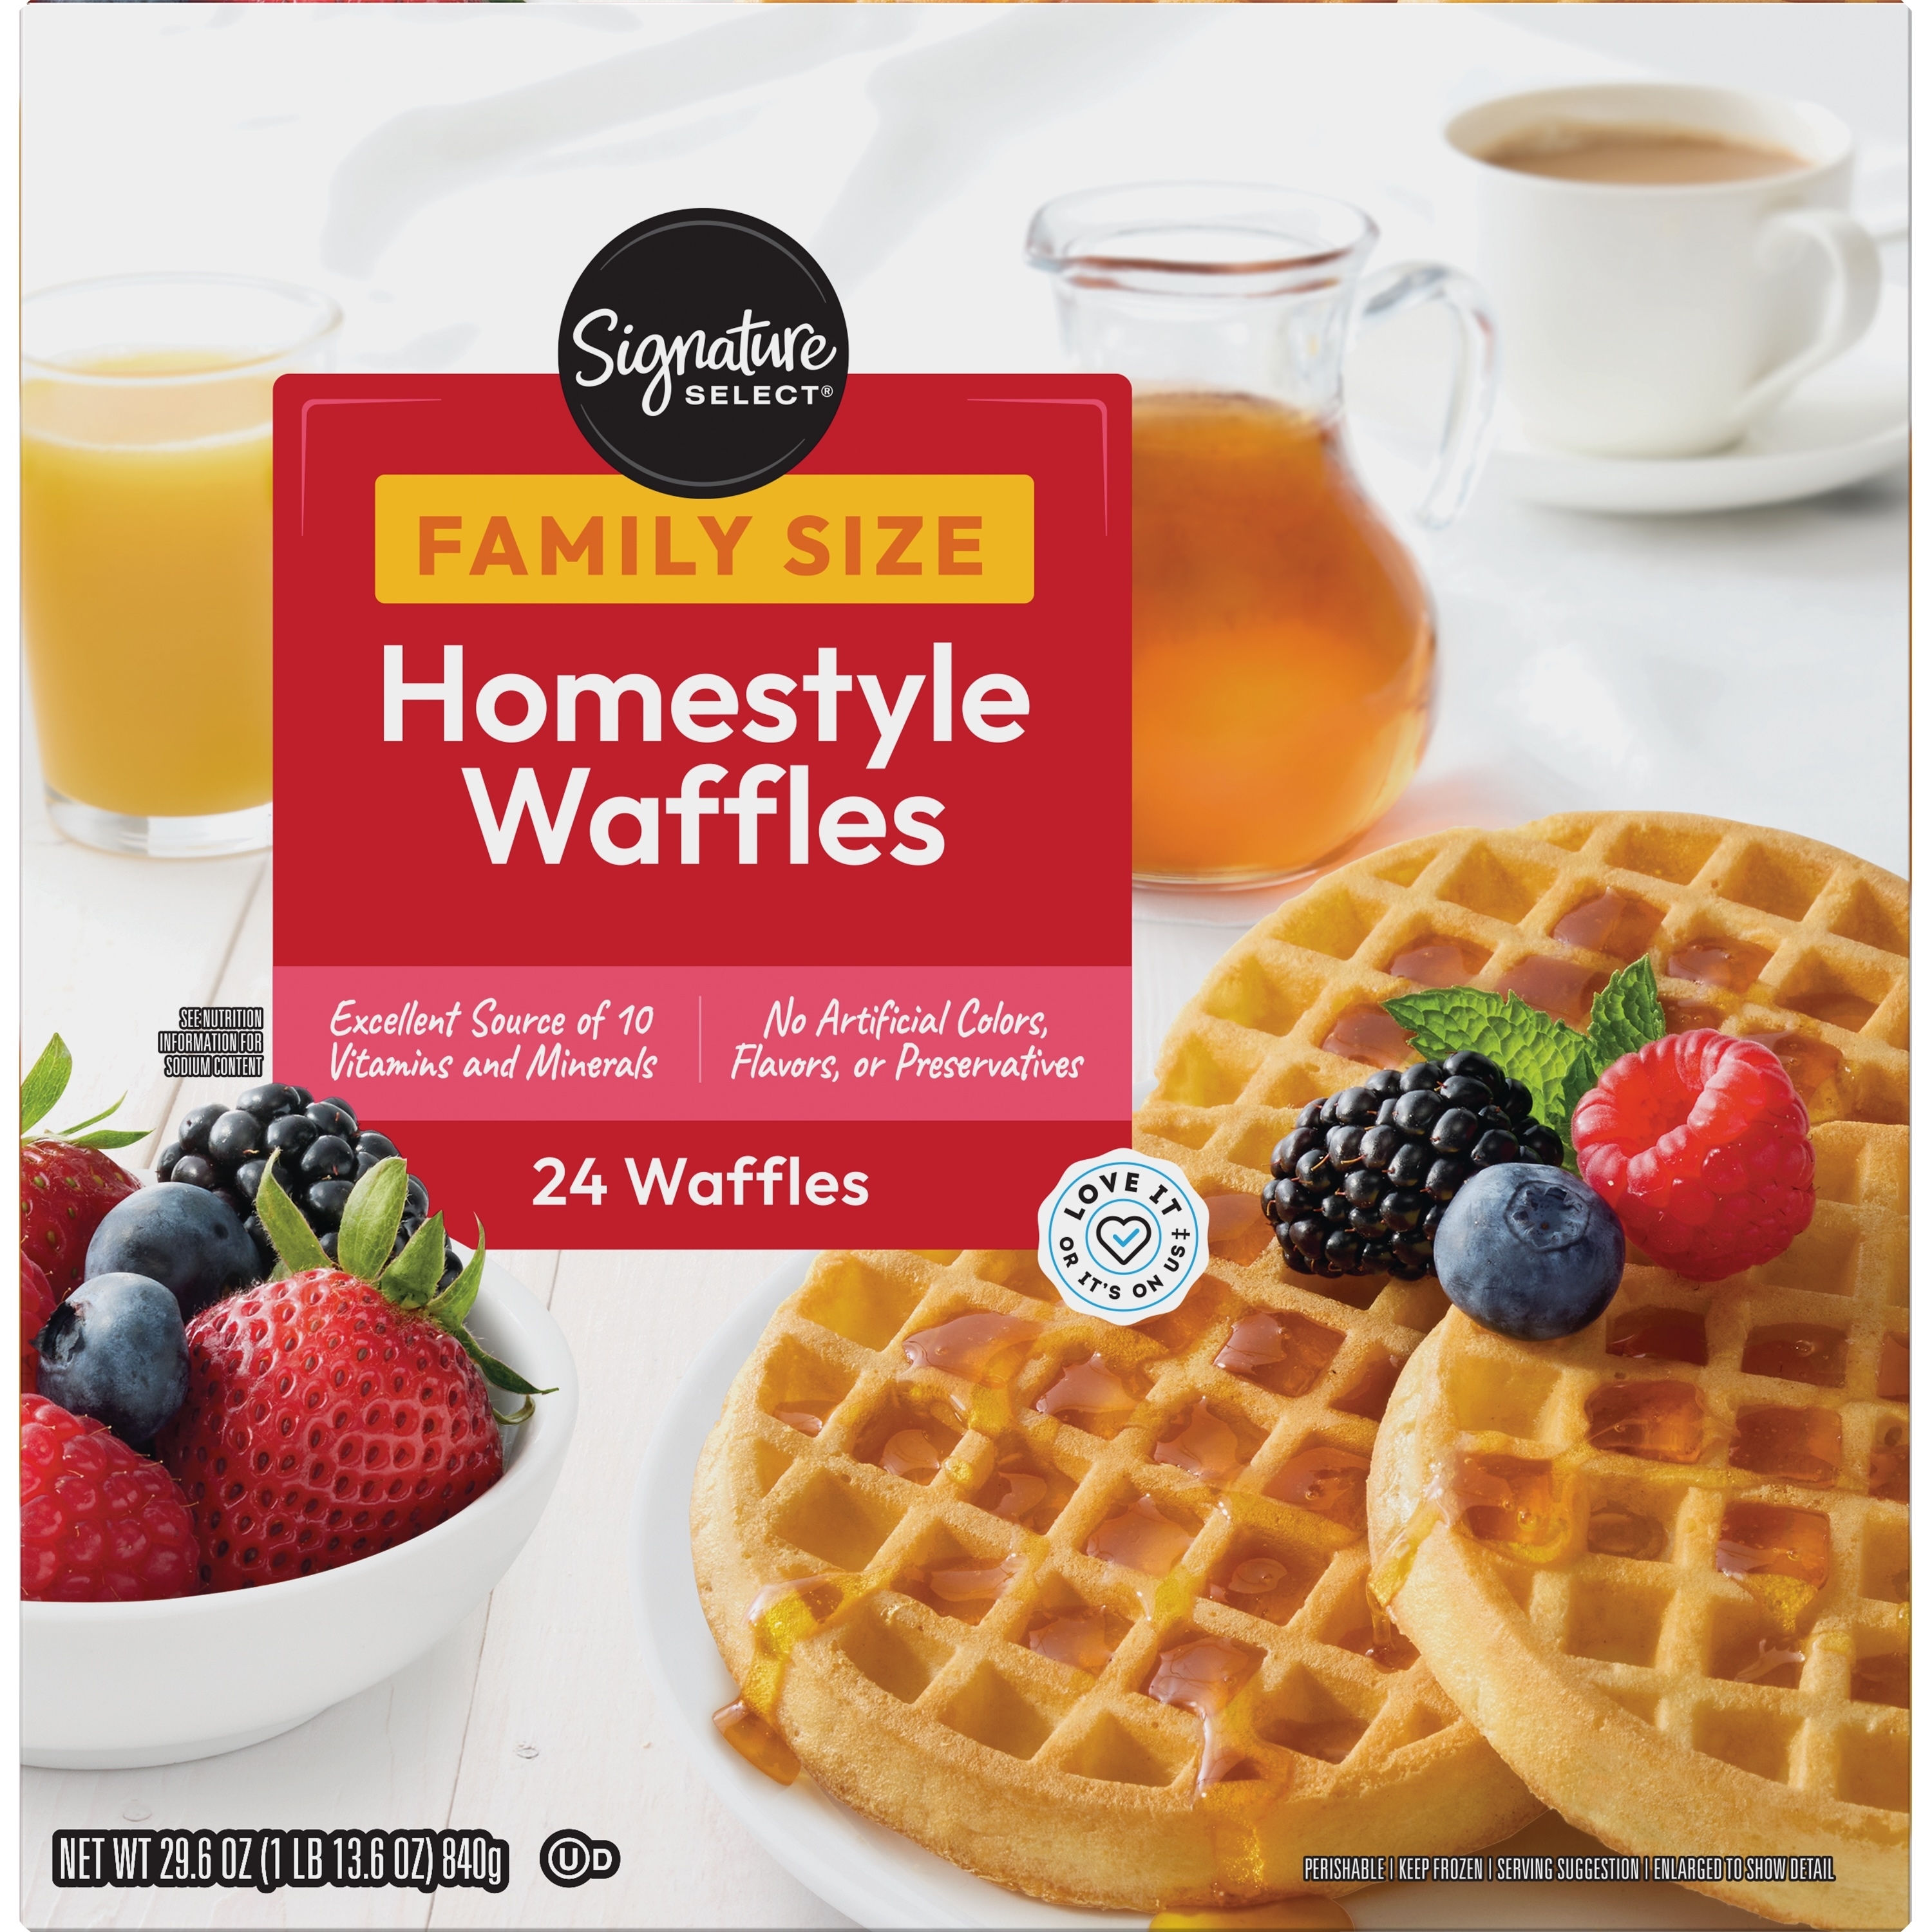 Packaging of Signature Select Homestyle Waffles with a plate of waffles and fruit, orange juice, and coffee in the background